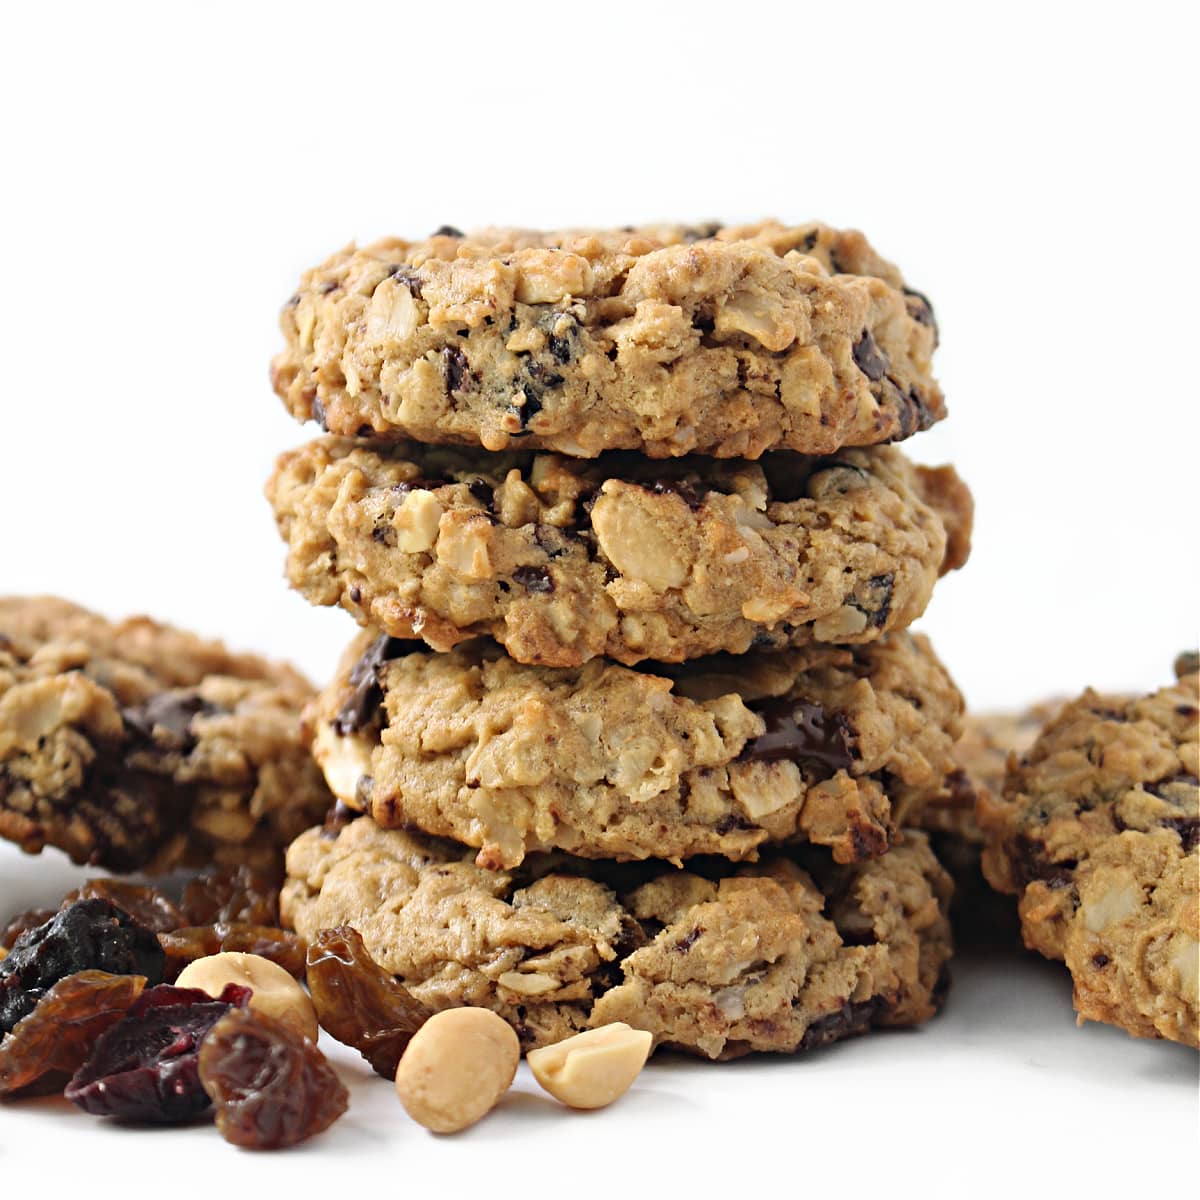 Stack of thick oatmeal cookies with bits of fruit, chocolate and peanuts.